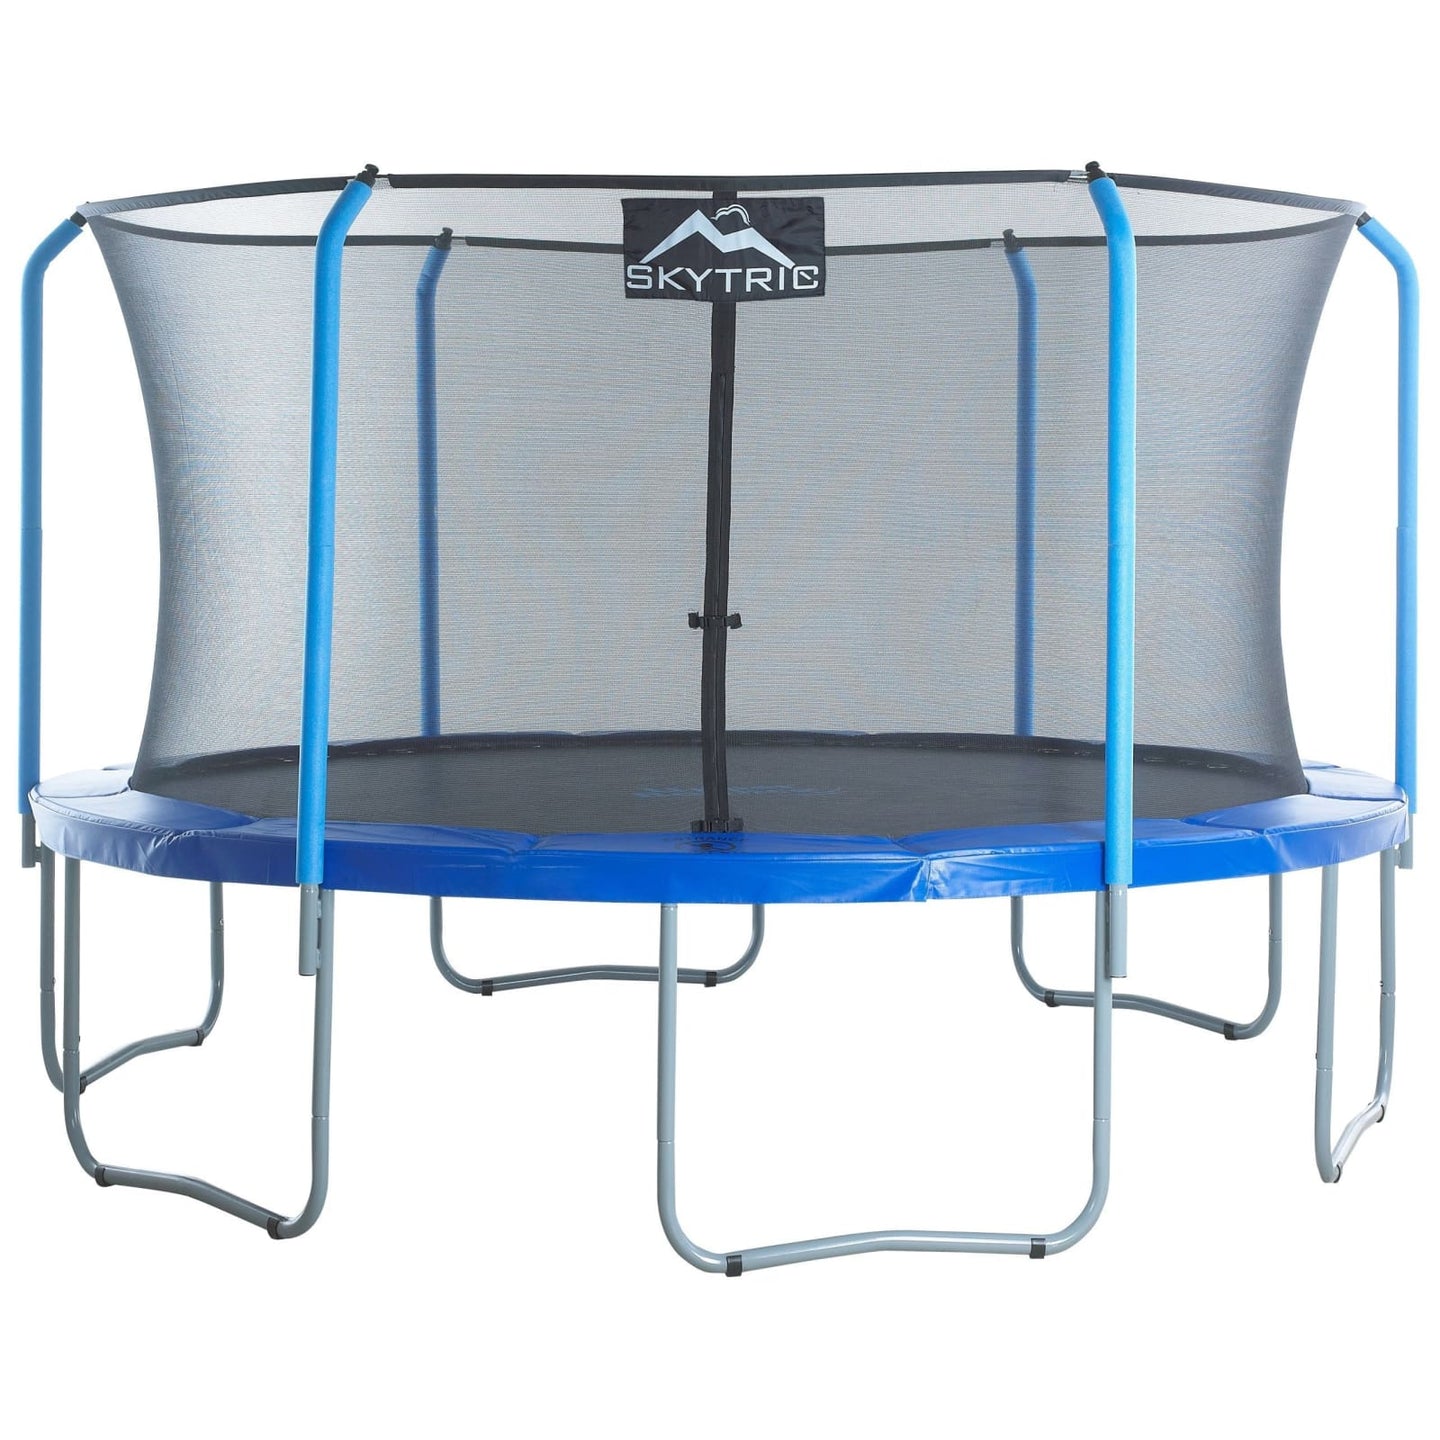 Skytric 15 Ft Trampoline W/ Top Ring Enclosure System - Ubsf02-15 - Trampolines